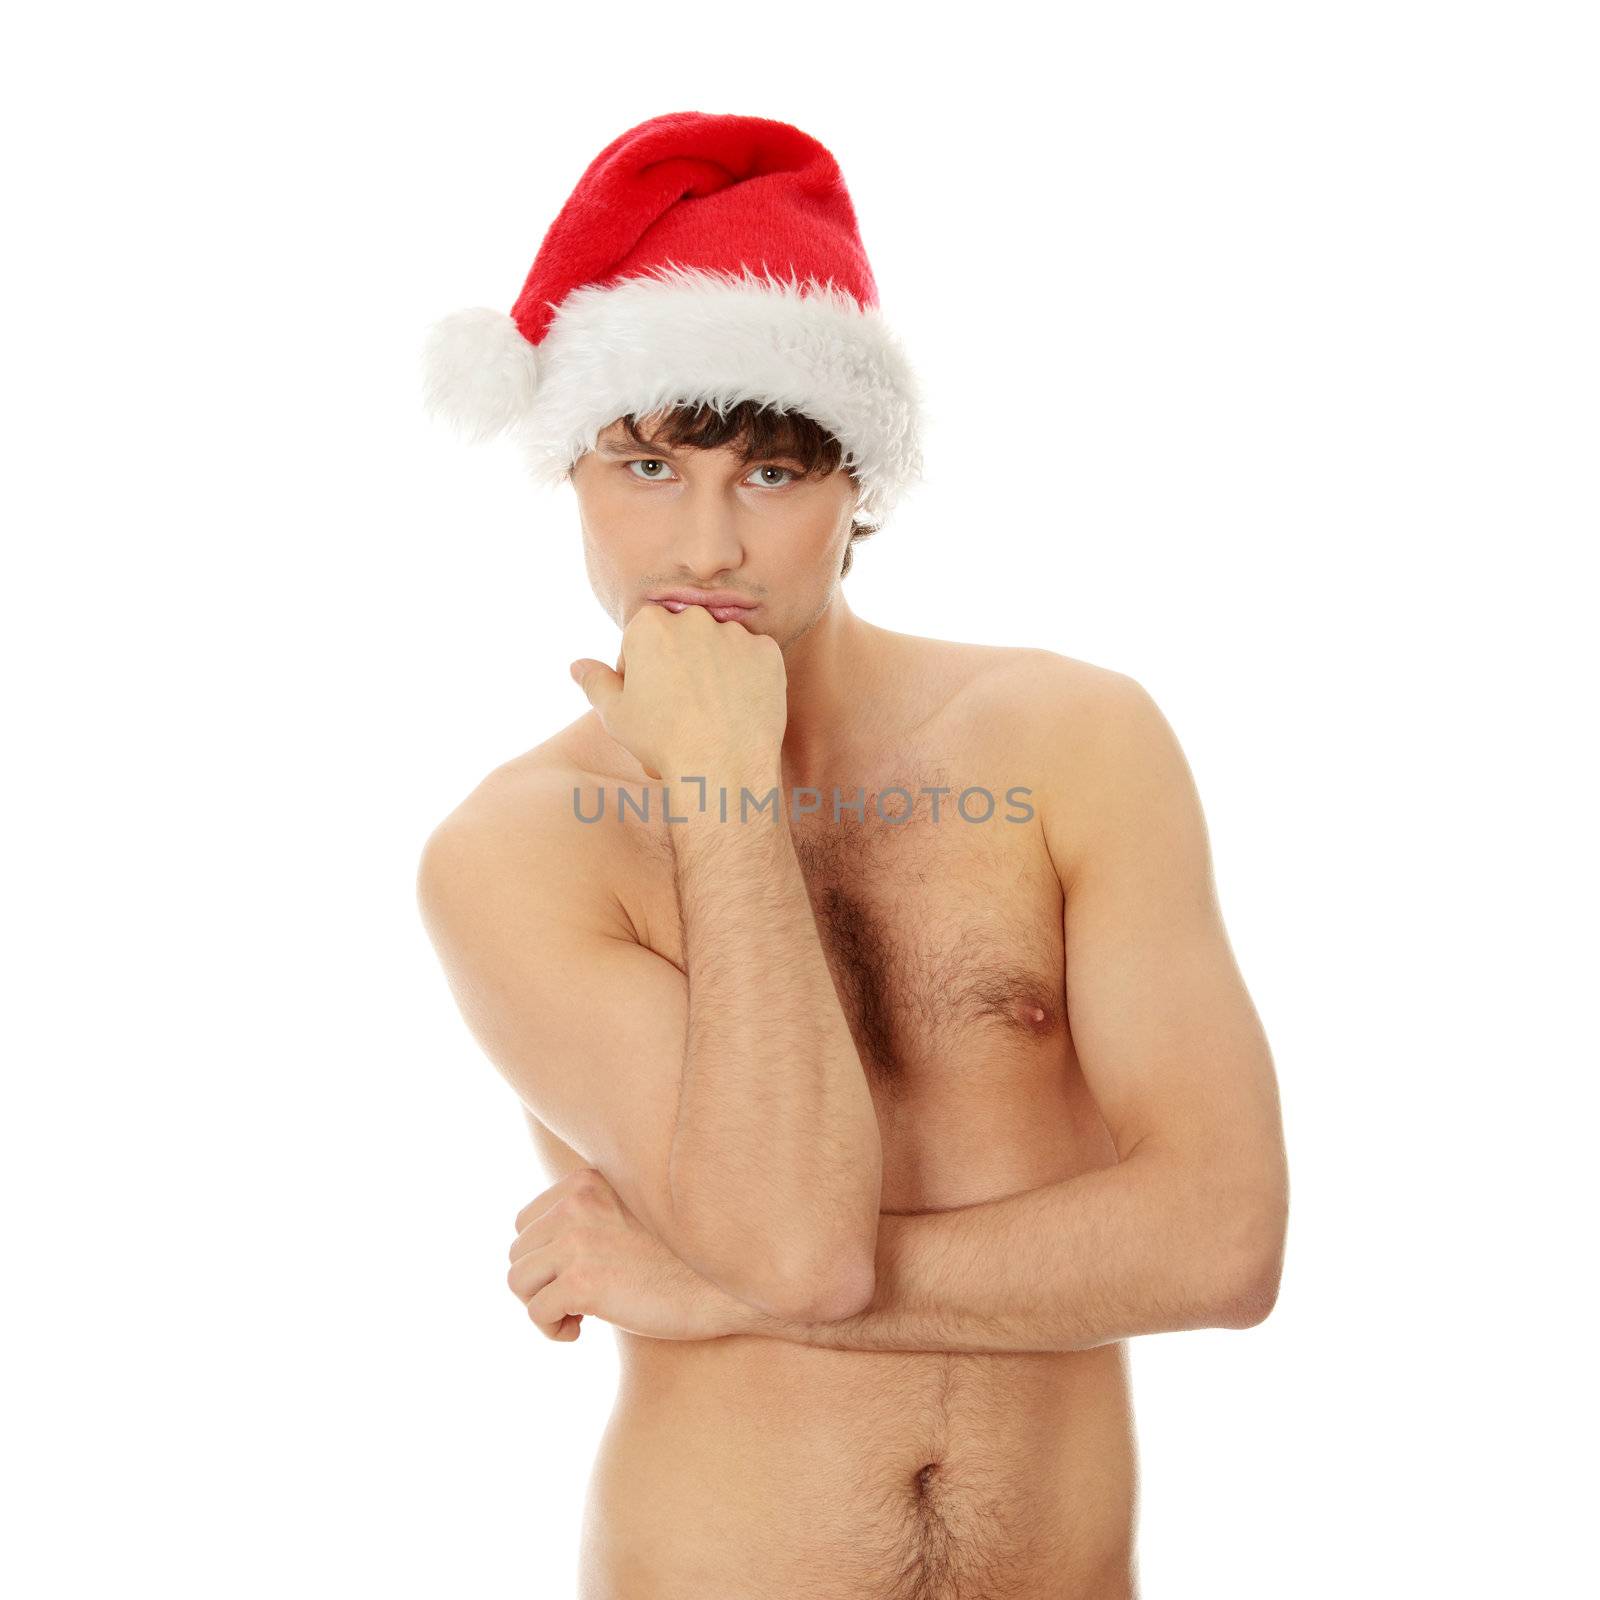 Handsome man with Santa's cap by BDS